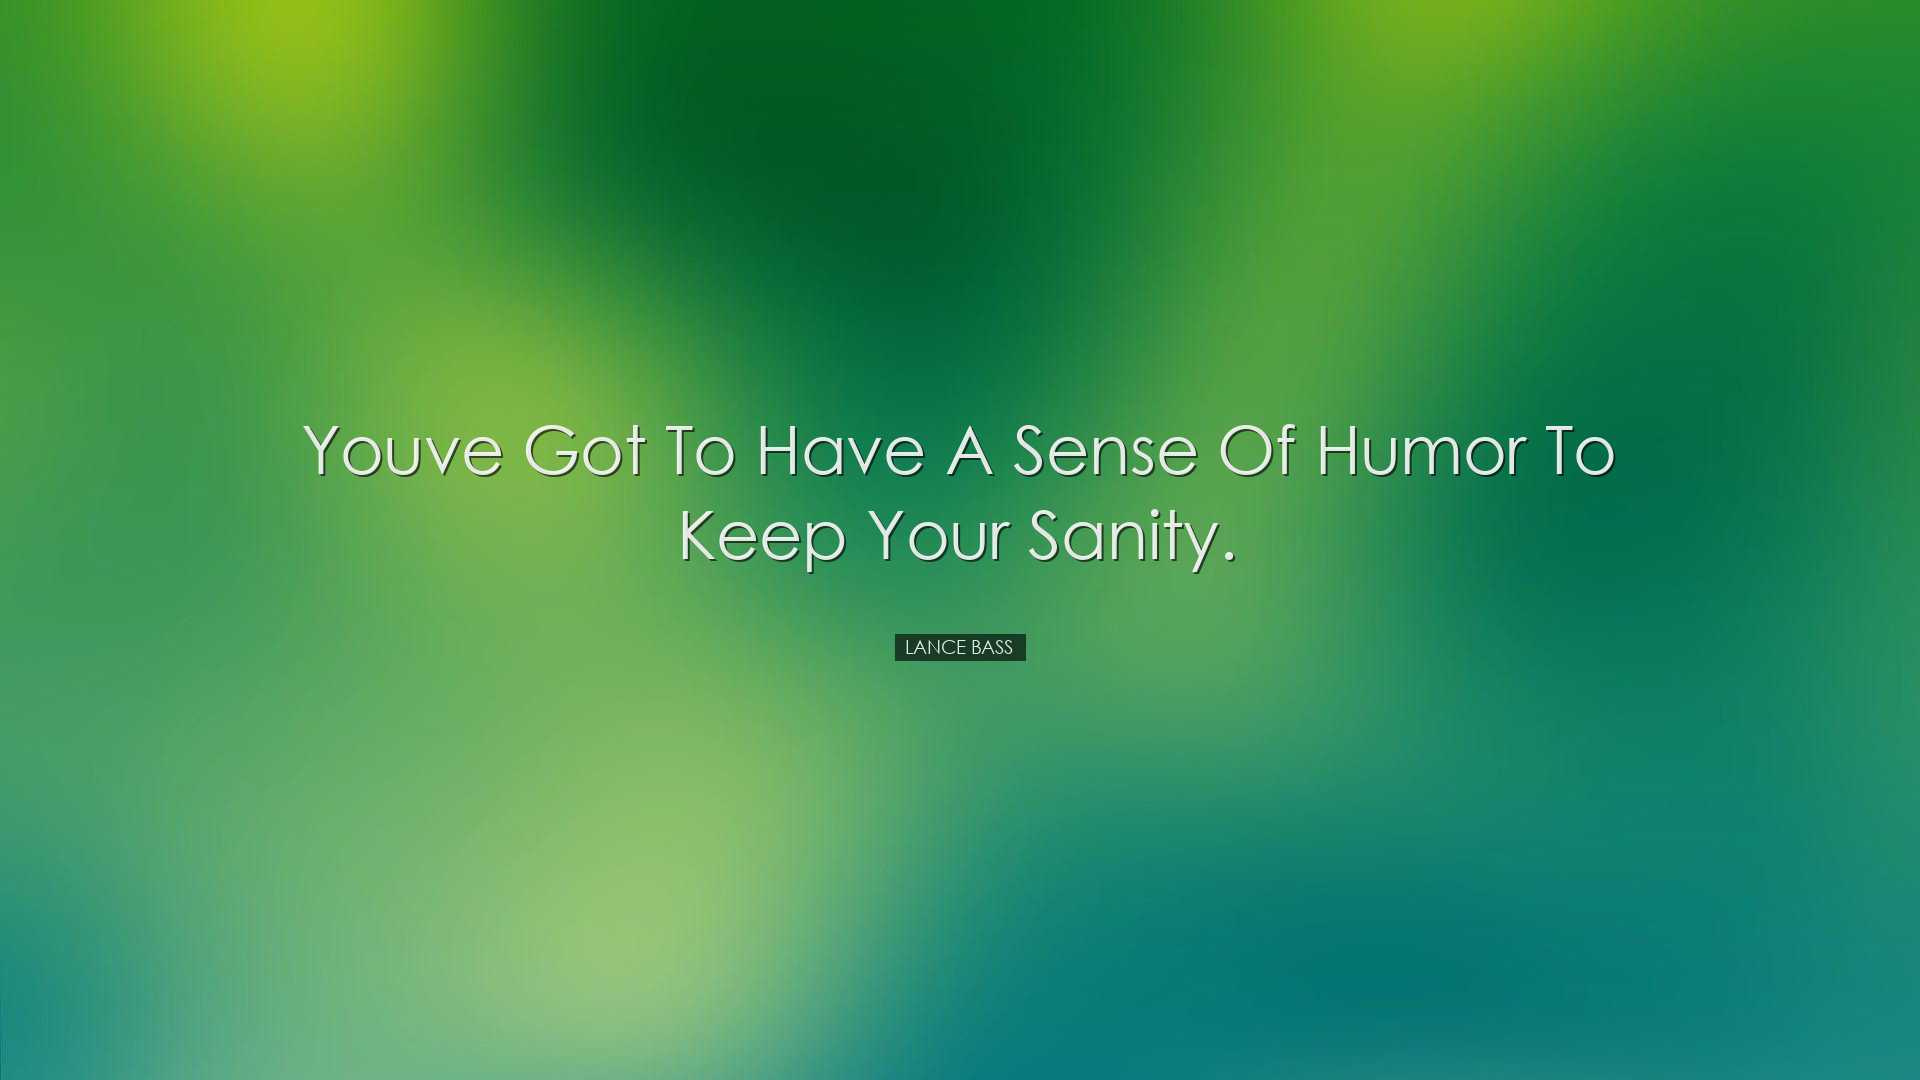 Youve got to have a sense of humor to keep your sanity. - Lance Ba